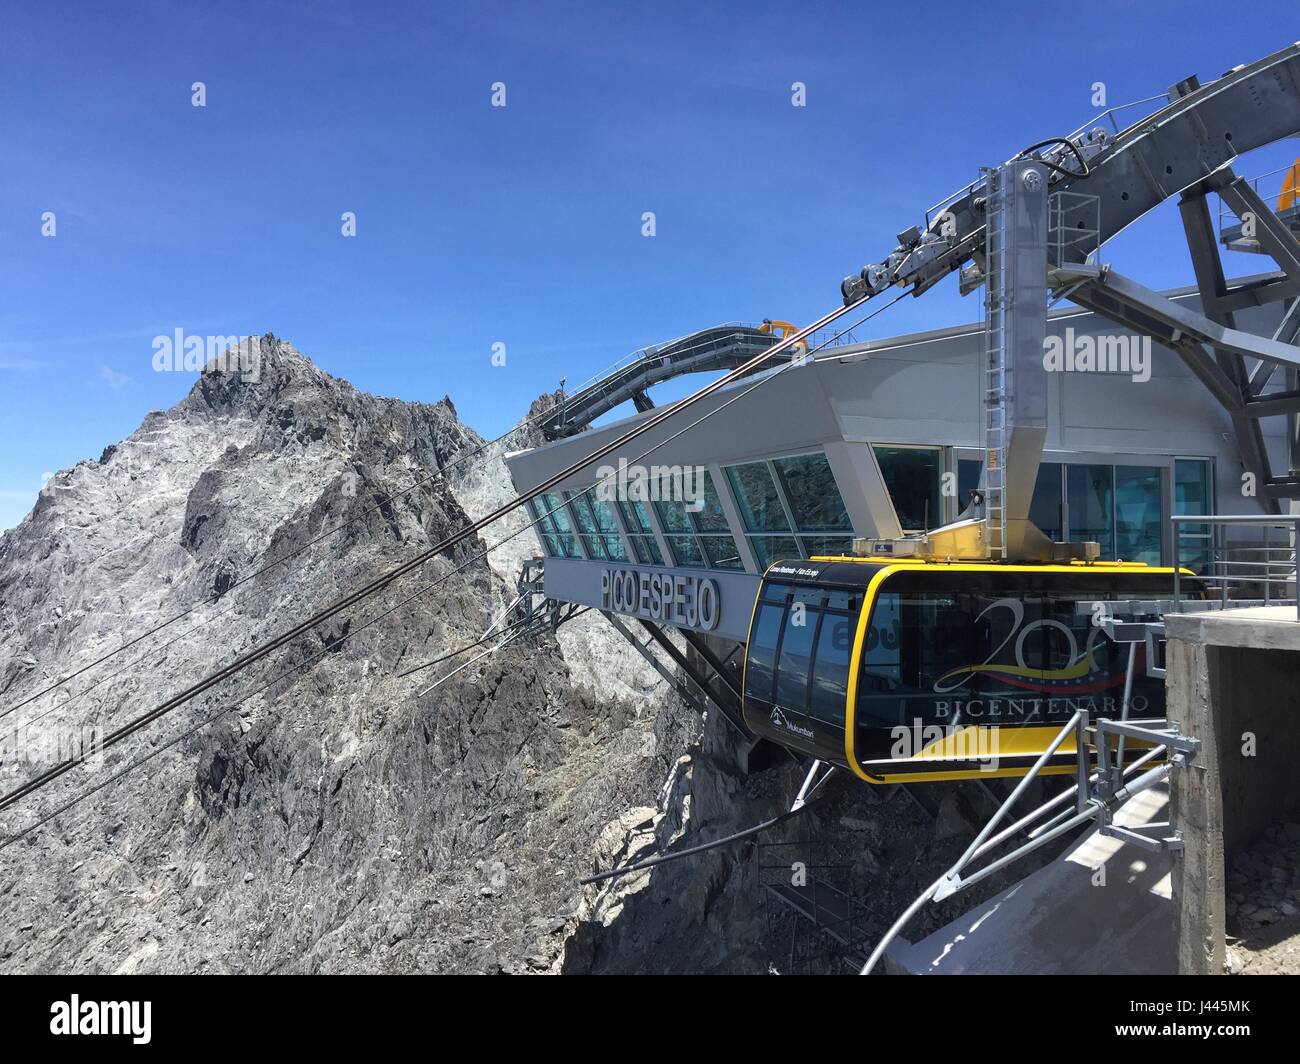 Merida, Venezuela. 06th Apr, 2017. dpatop - A cableway gondola pictured as it arrives to the 4765-meter high mountain station - where Venezuela's highest peak, Pico Bolivar, can be seen in the background - taken in Merida, Venezuela, 06 April 2017. Crisis-torn Venezuela is aiming to attract back tourists with the world's longest and highest cableway. The problem is that there are no tourists. And the cableway is still not paid for. Photo: Georg Ismar/dpa/Alamy Live News Stock Photo